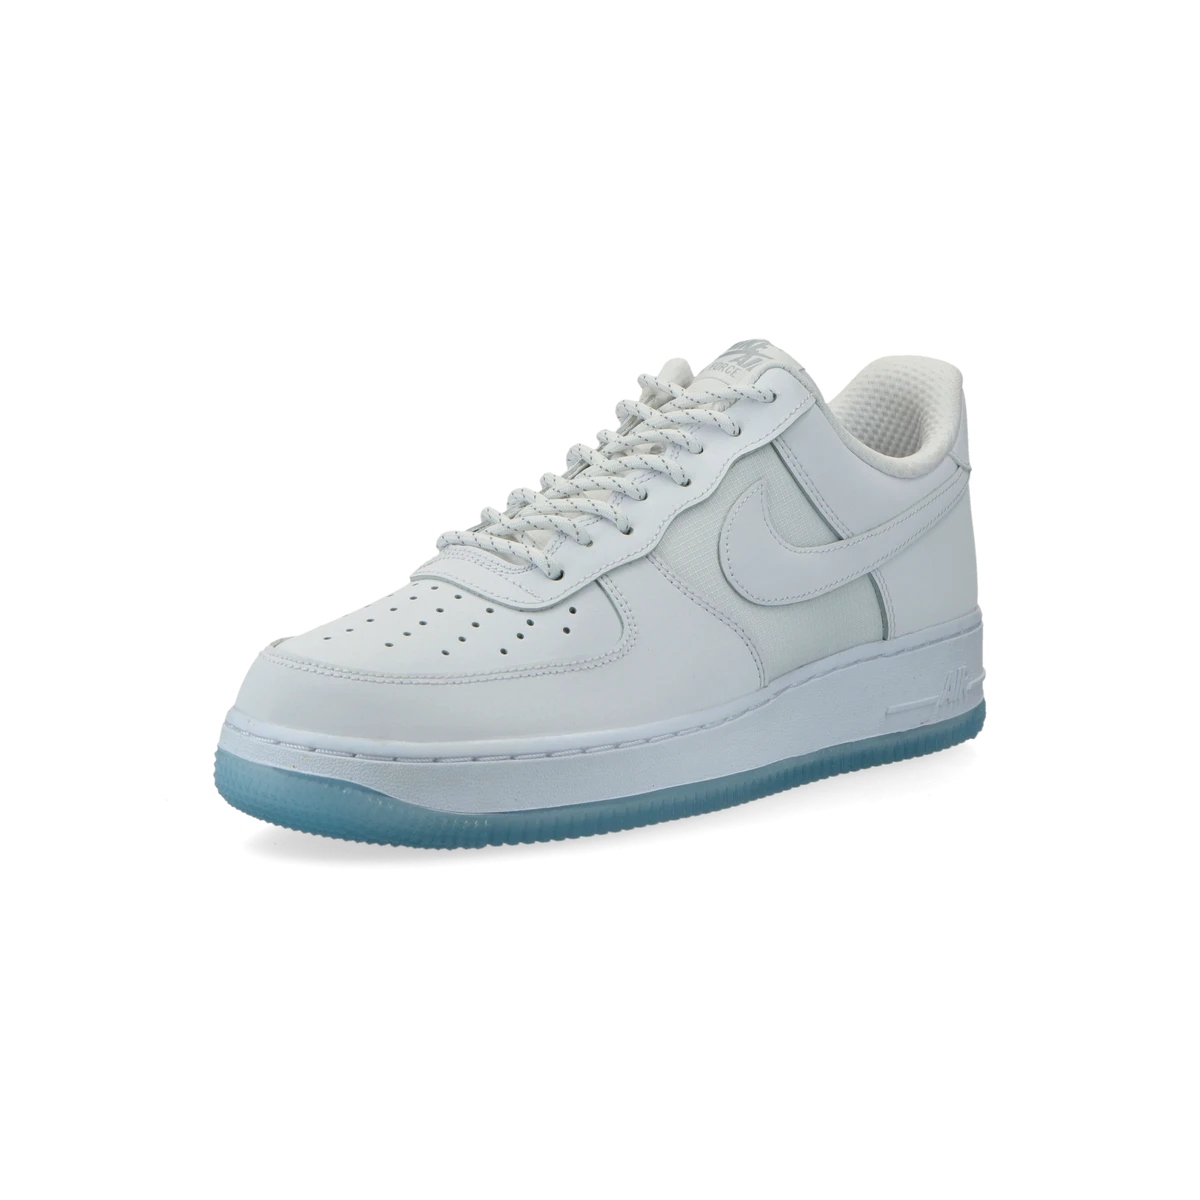 Nike Air Force 1 Low "White Icy Blue"